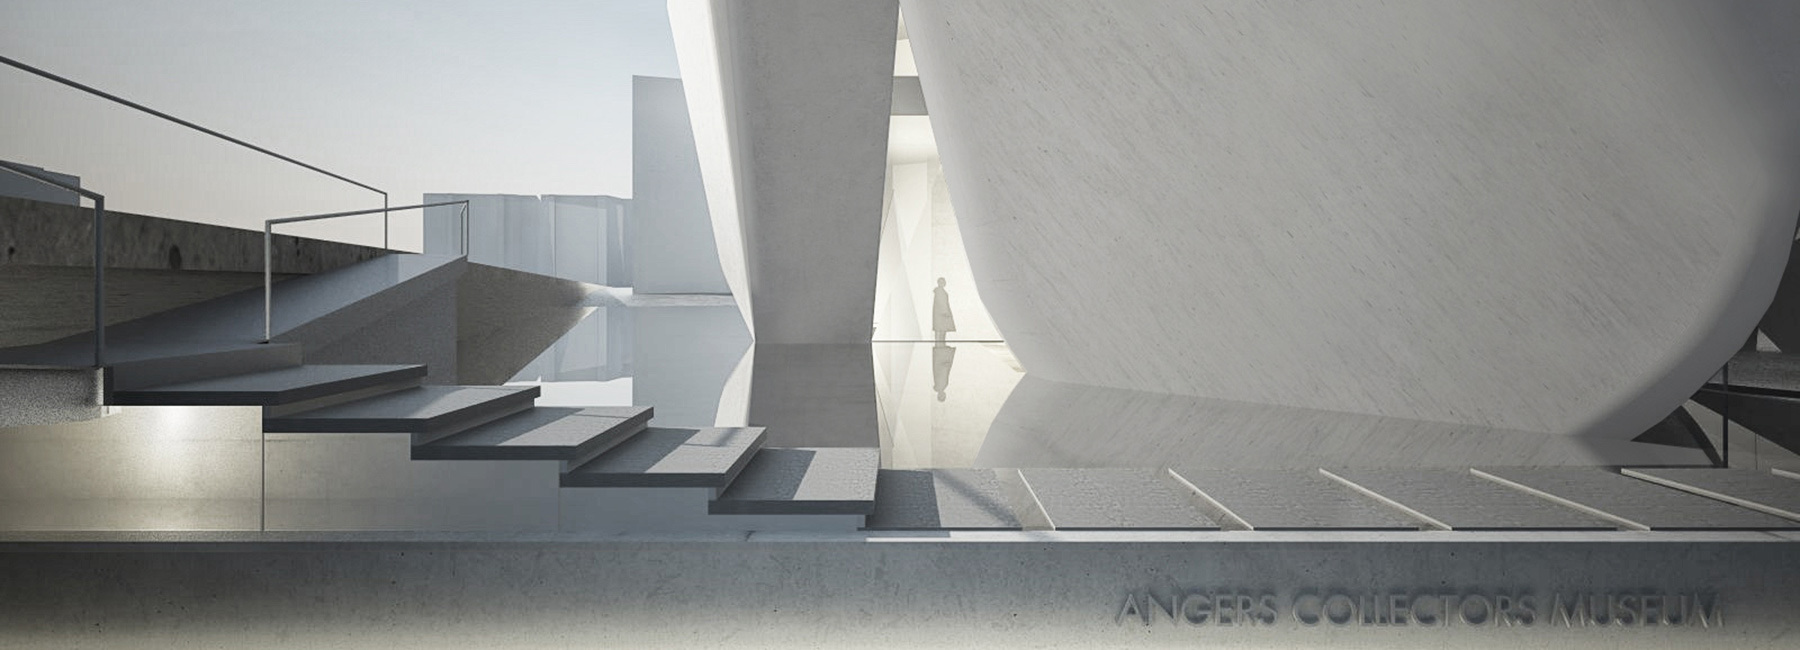 steven holl architects wins competition for angers collectors museum and hotel in france